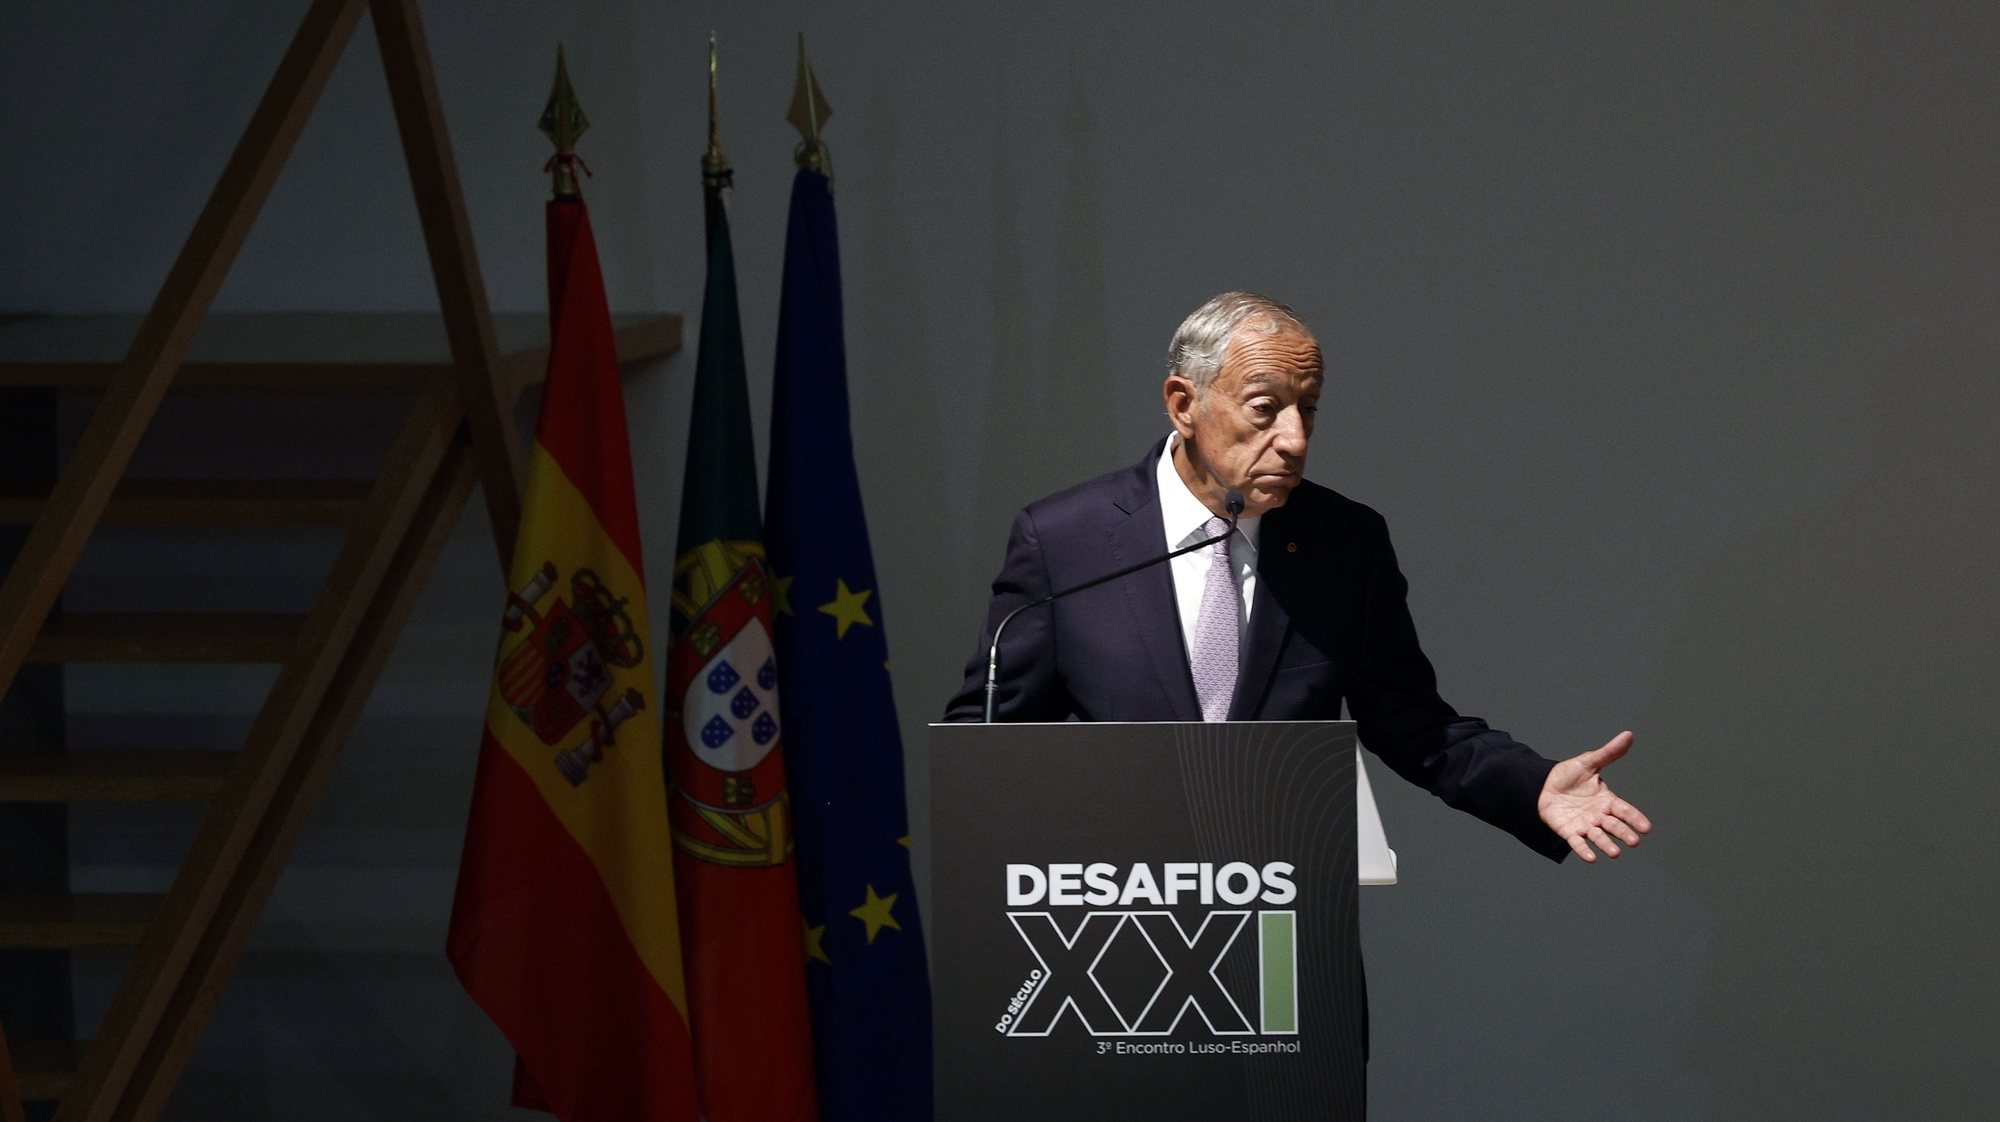 Portuguese President of the Republic, Marcelo Rebelo de Sousa, attends the 3rd Luso-Spanish Meeting, organized by the Foundation D. Luís I and Foundation Duques de Soria, dedicated to the &#039;Challenges of the 21st Century, in Cascais, Portugal, 30 September 2023. ANTÓNIO PEDRO SANTOS/LUSA/POOL